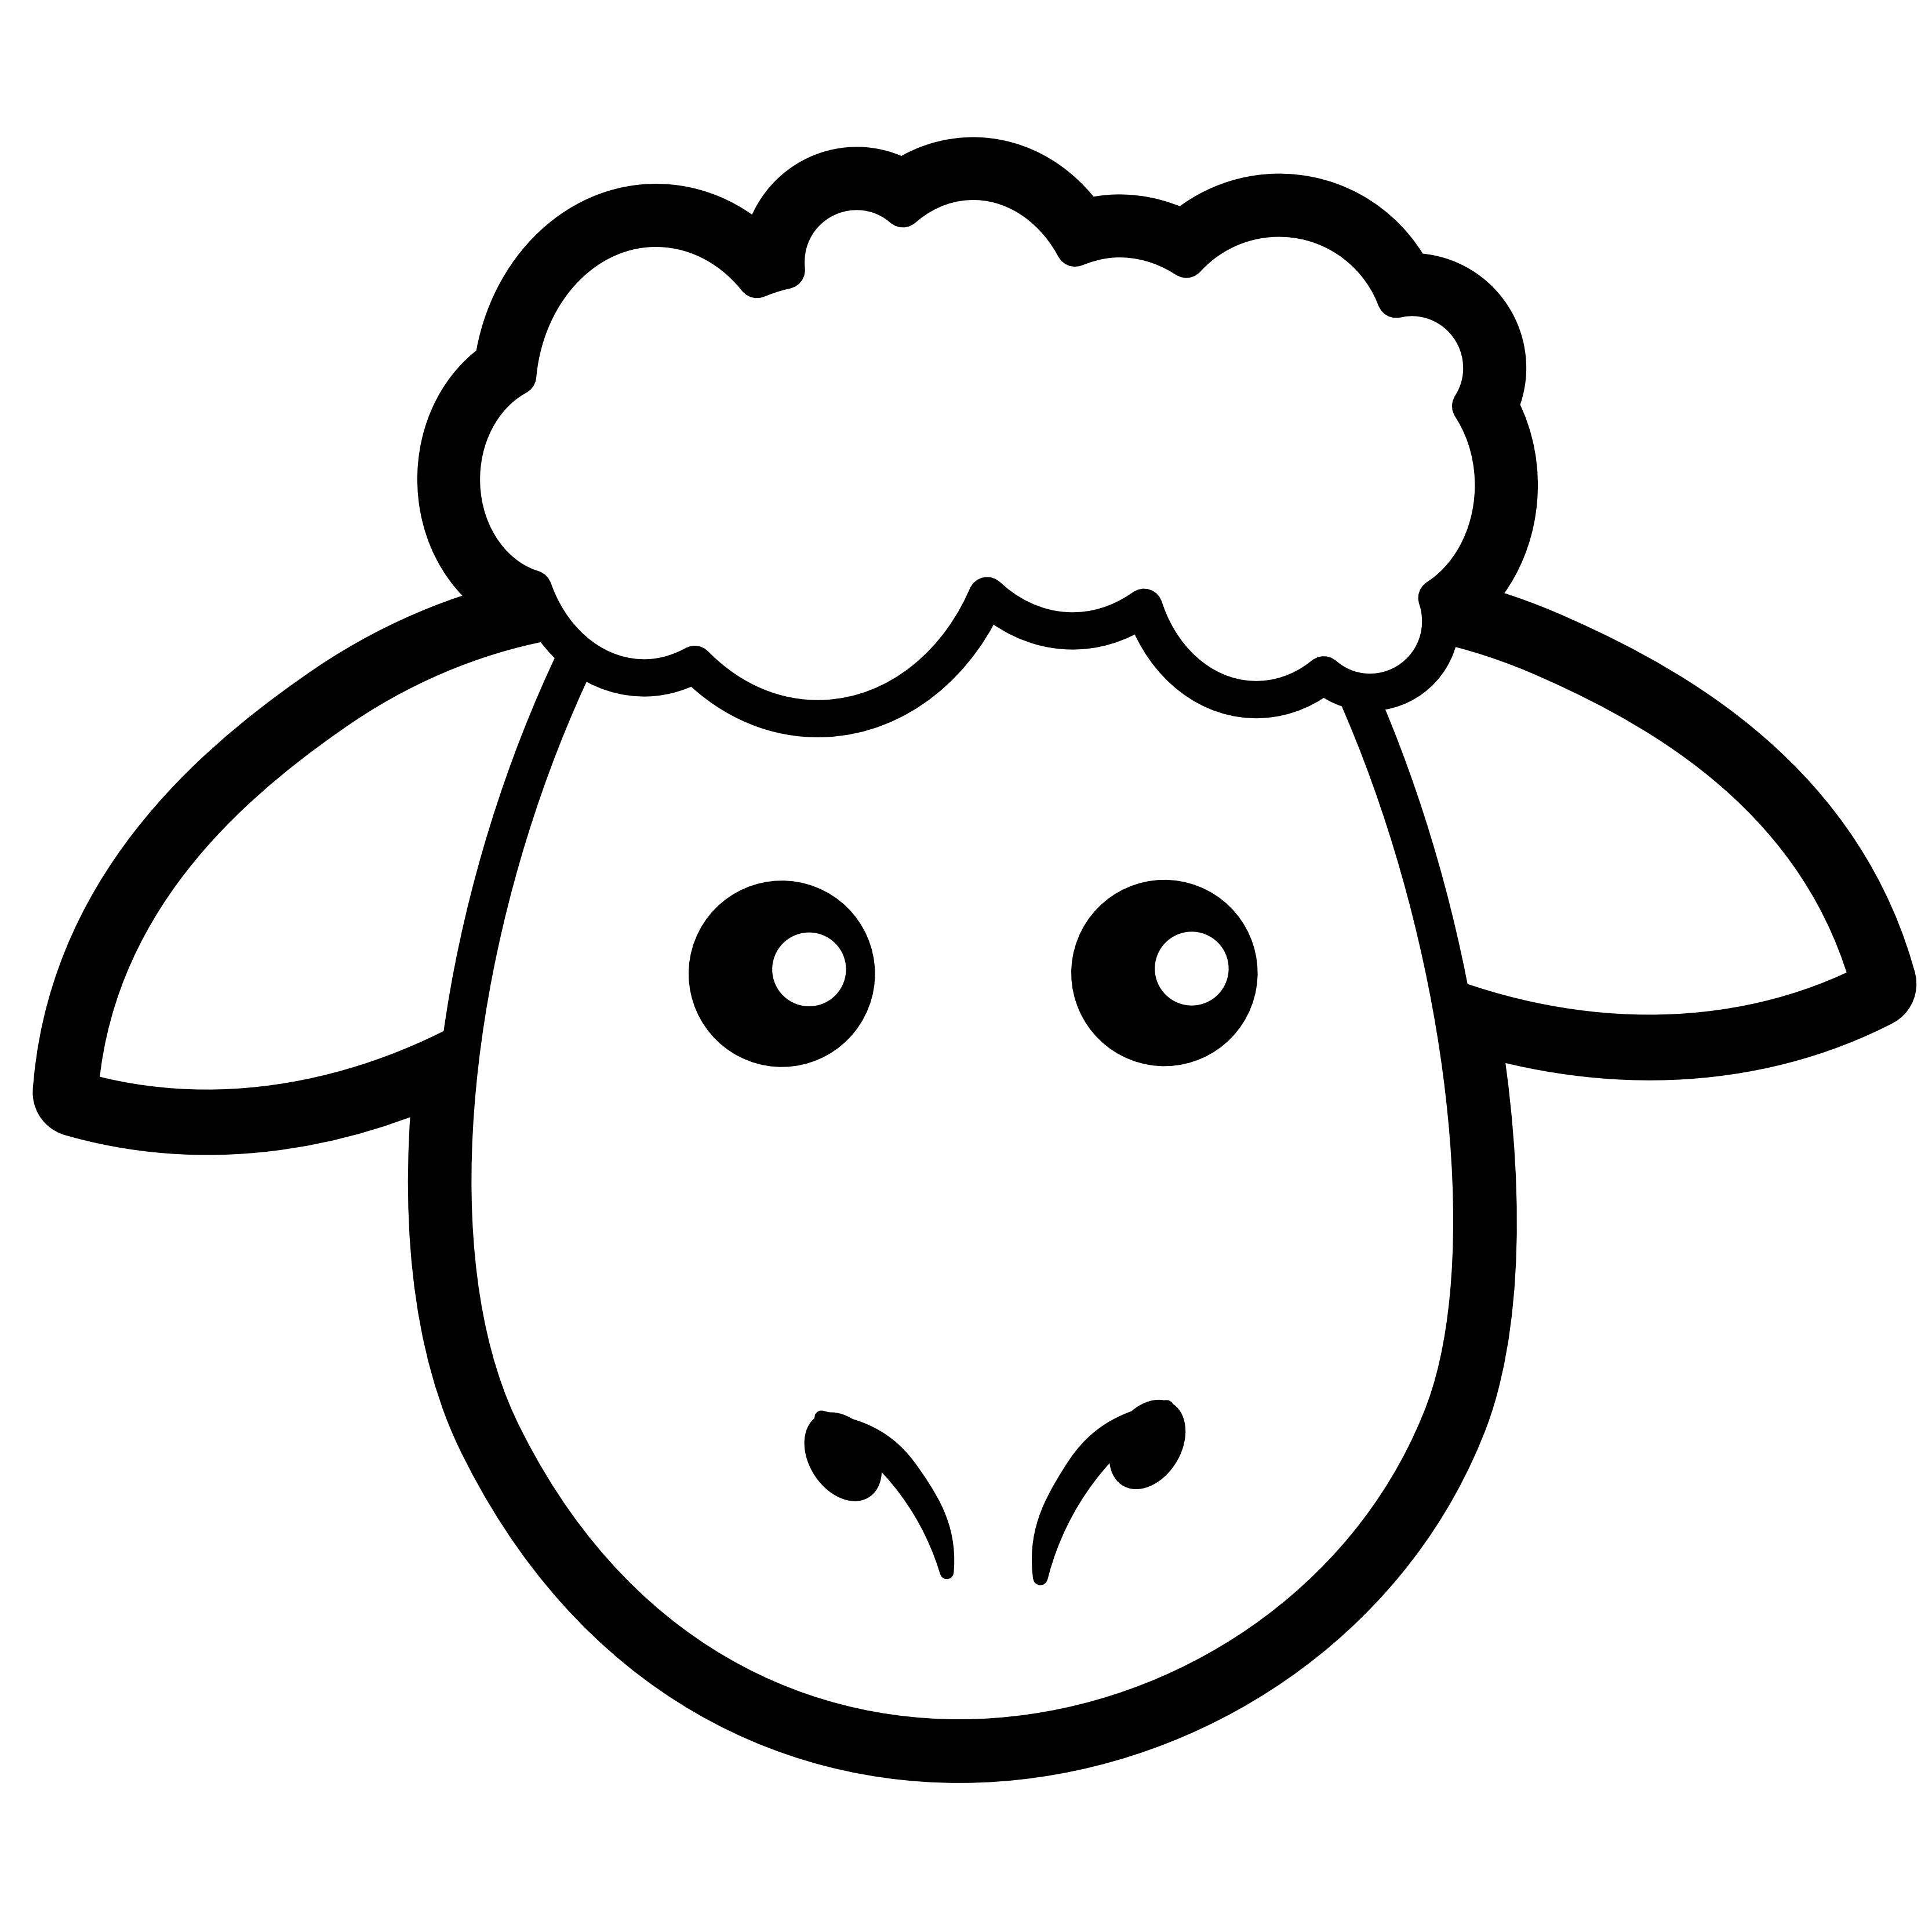 Sheep clipart black and white